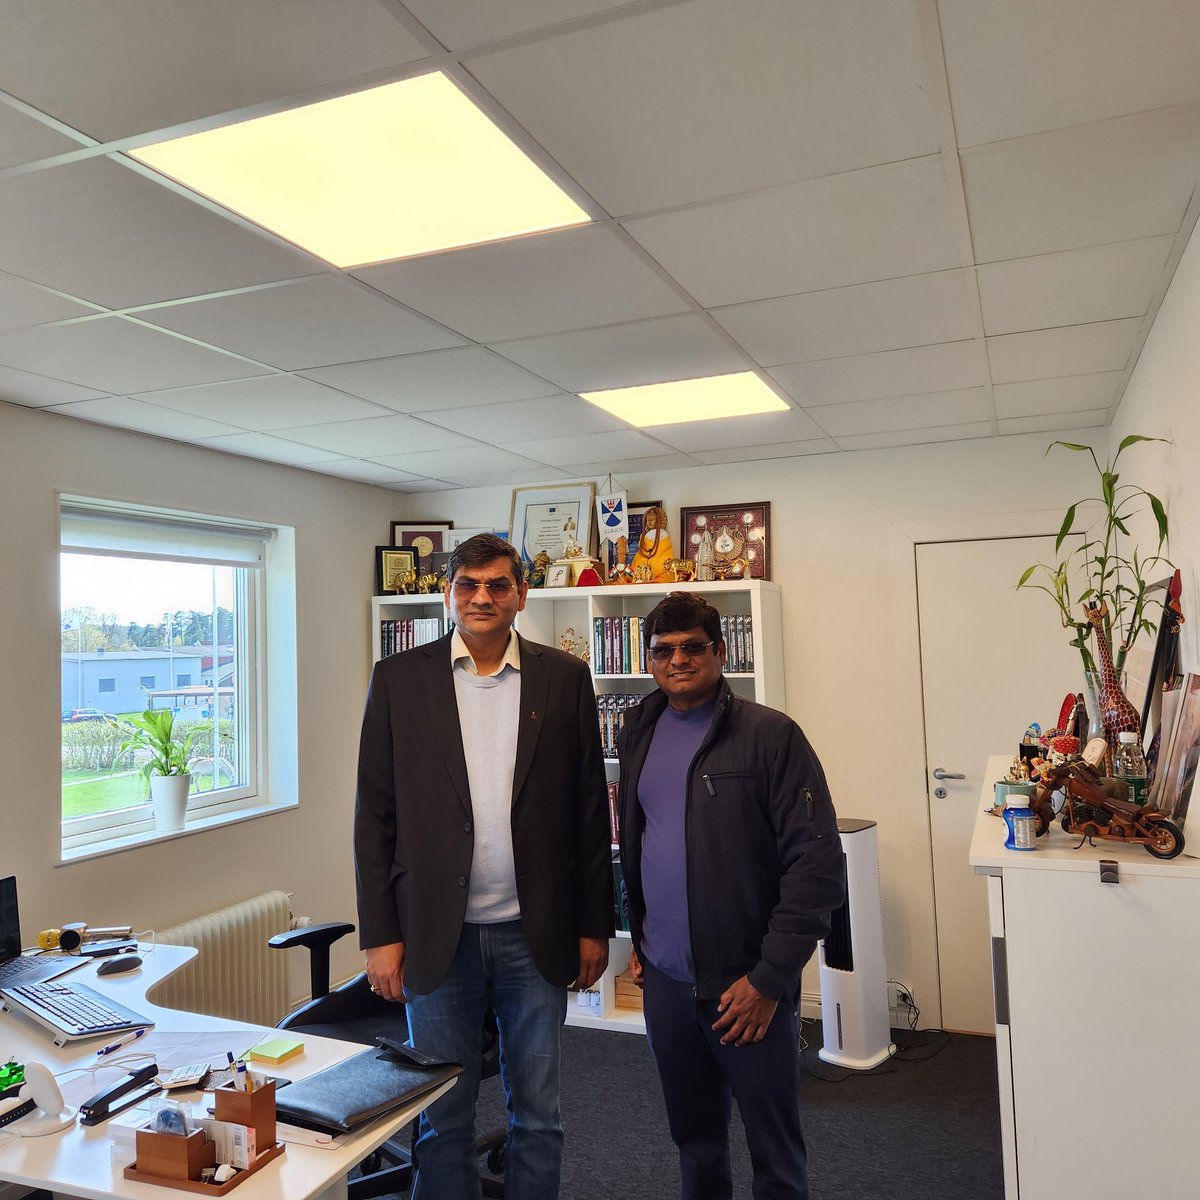 SKP Karuna Meeting with Institute of Advanced Materials in Ulrika, Linkoping, Sweden for Research Collaboration. 

@skpkaruna